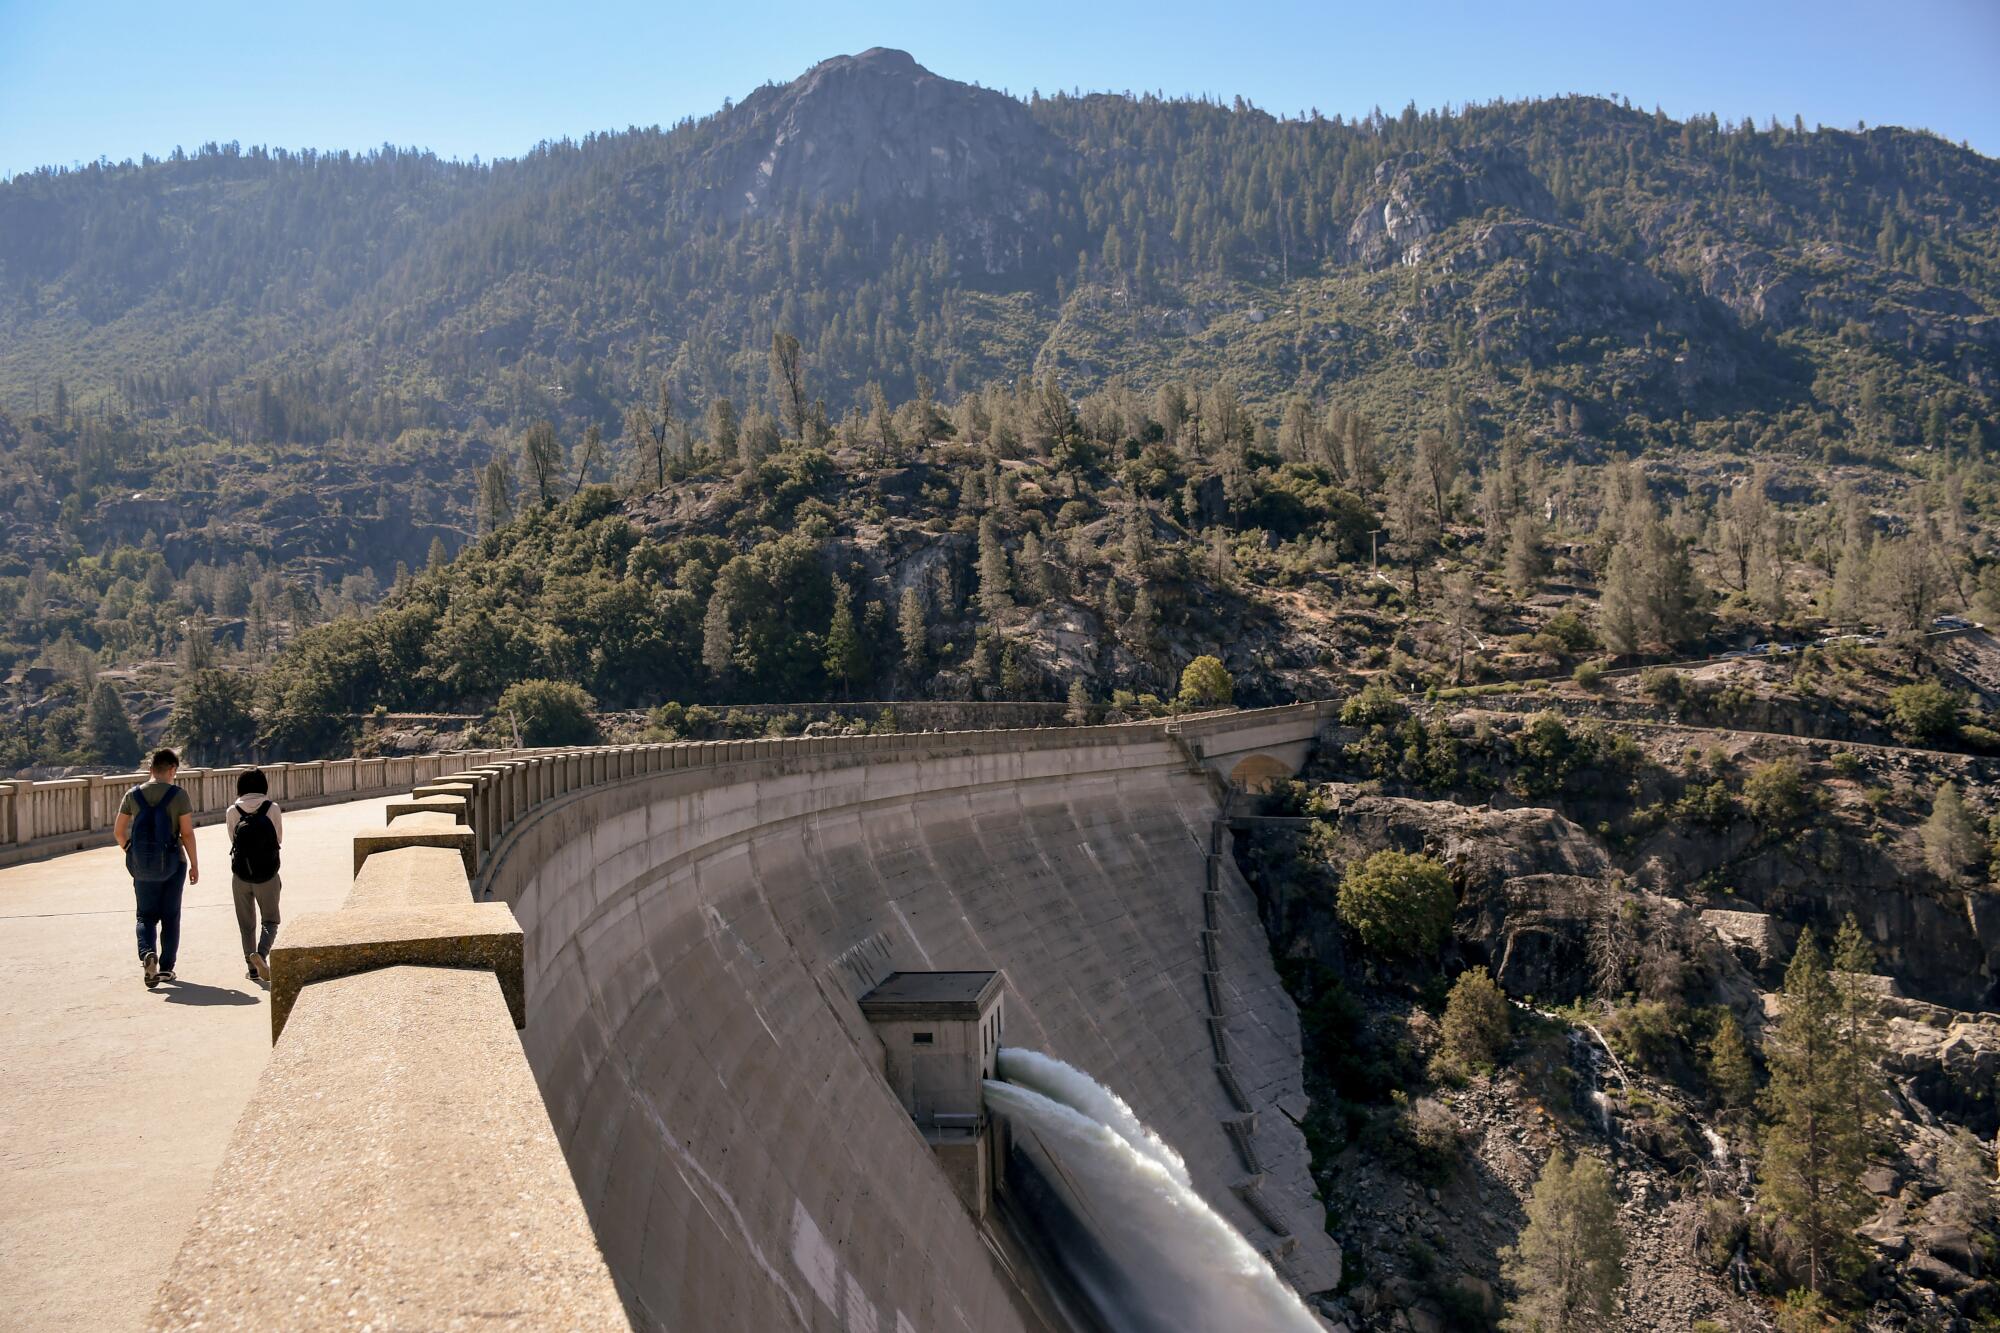 From the Hetch Hetchy Valley's O'Shaughnessy Dam, the Tuolumne River flows into the San Joaquin Valley.